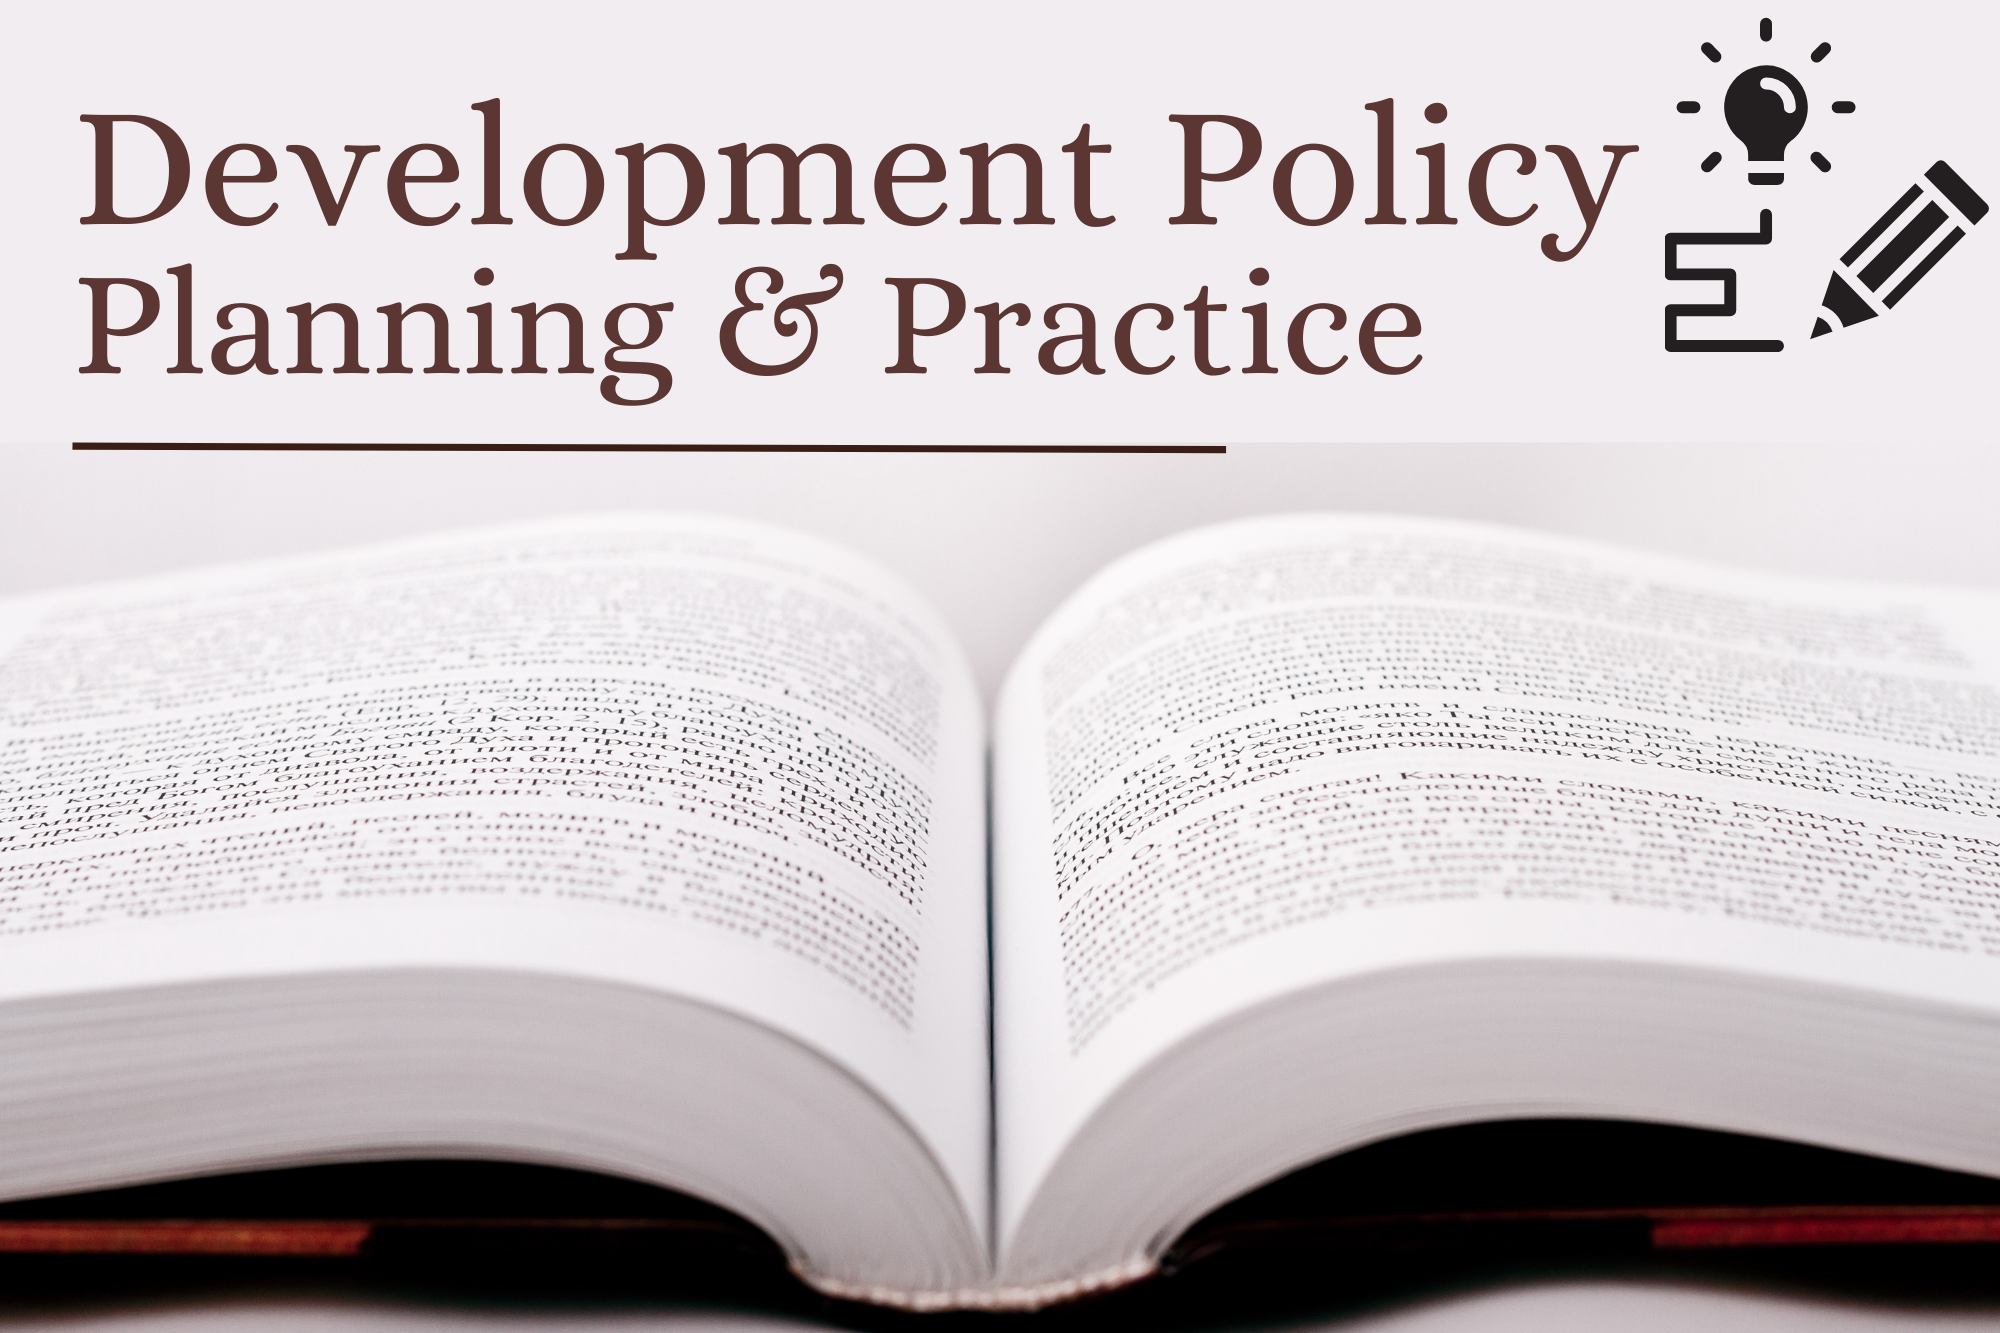 Exploring the Career Paths in a Development Policy, Planning, and Practice